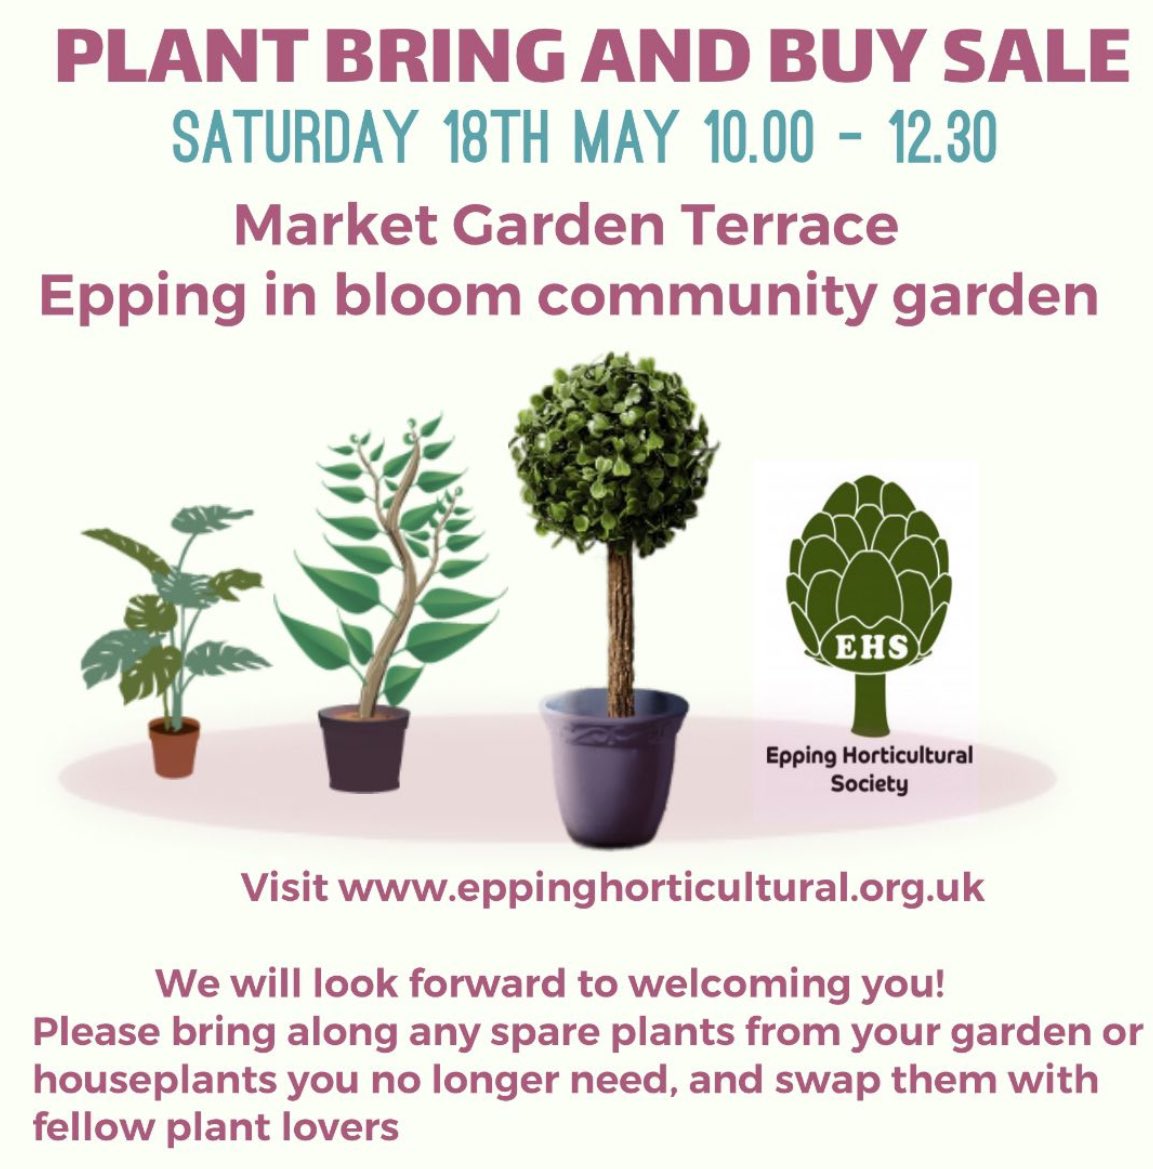 Only one week to go! Come along bring a plant and swap it for another #Epping #plants #plantswap #communityevent